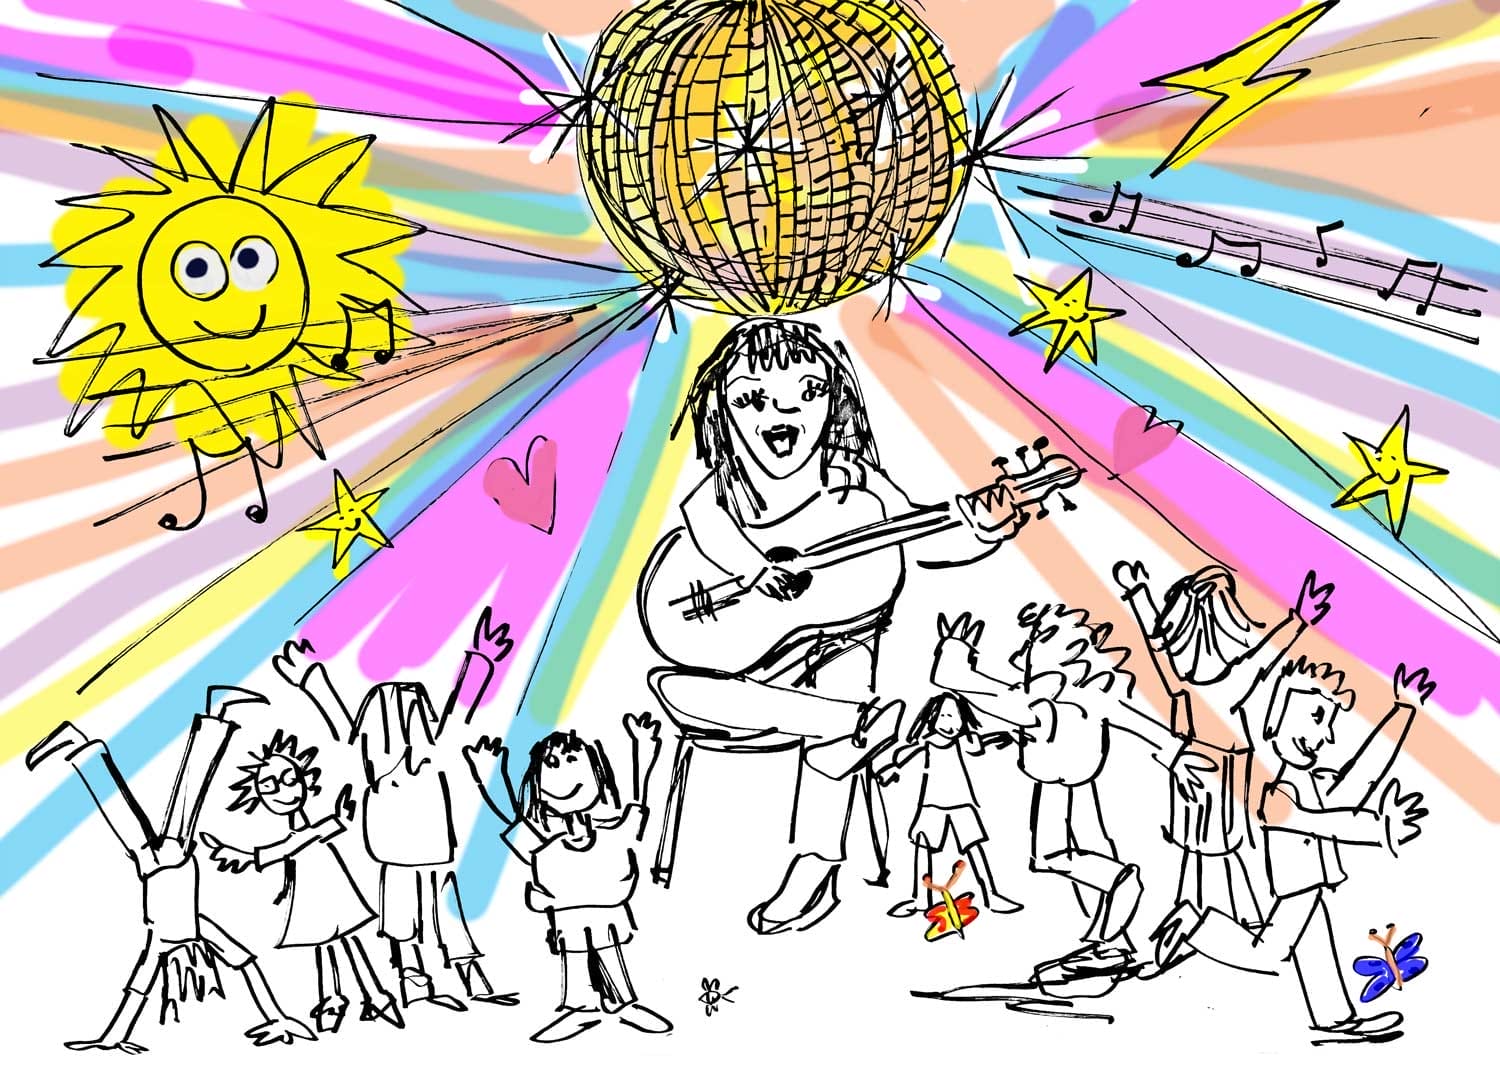 A colourful digital illustration displays a performer playing guitar while groups of children dance and play around them. In the background there is a large gold disco ball emitting rays of rainbow light, sparkles, hearts and stars, as well as a big yellow smiley sun to the left.